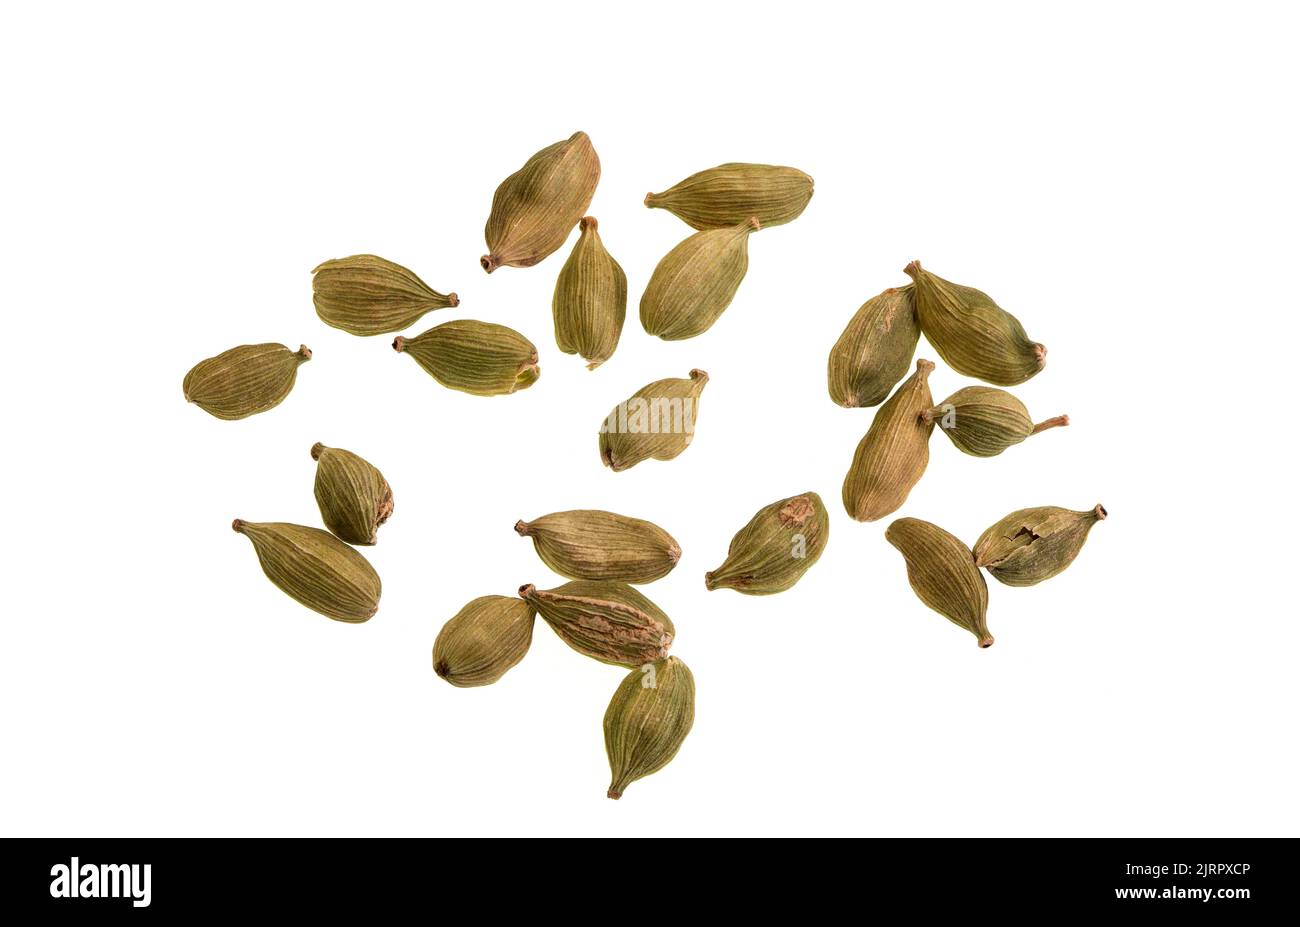 Cardamom is a spice made from the seeds of plants in the genera Elettaria, family Zingiberaceae, native of the Indian subcontinent and Indonesia. Stock Photo